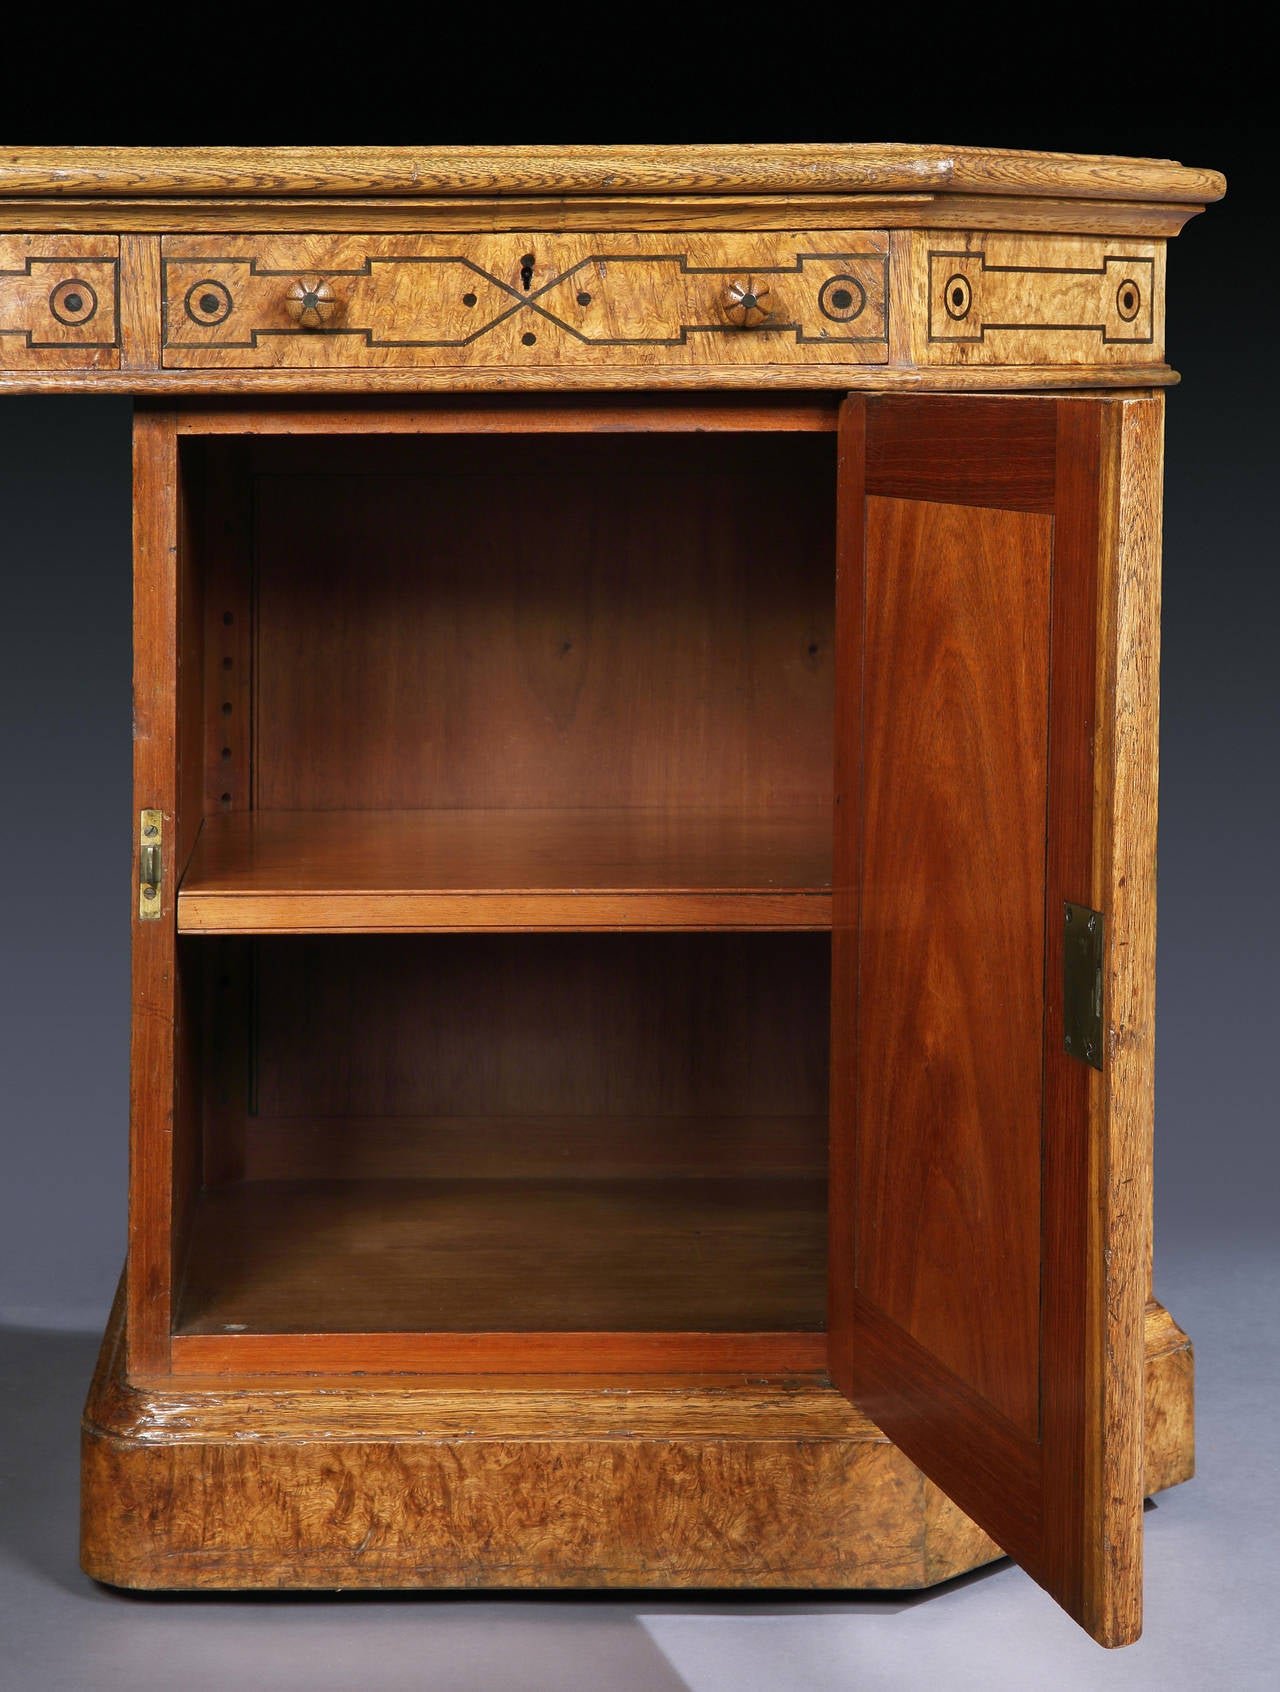 A double partners desk by Johnstone and Jeanes of London.

Of octagonal form, being constructed in pollarded oak, and dressed with line inlays of angular geometric form; the four separate pedestals having fielded panels, are fitted with large